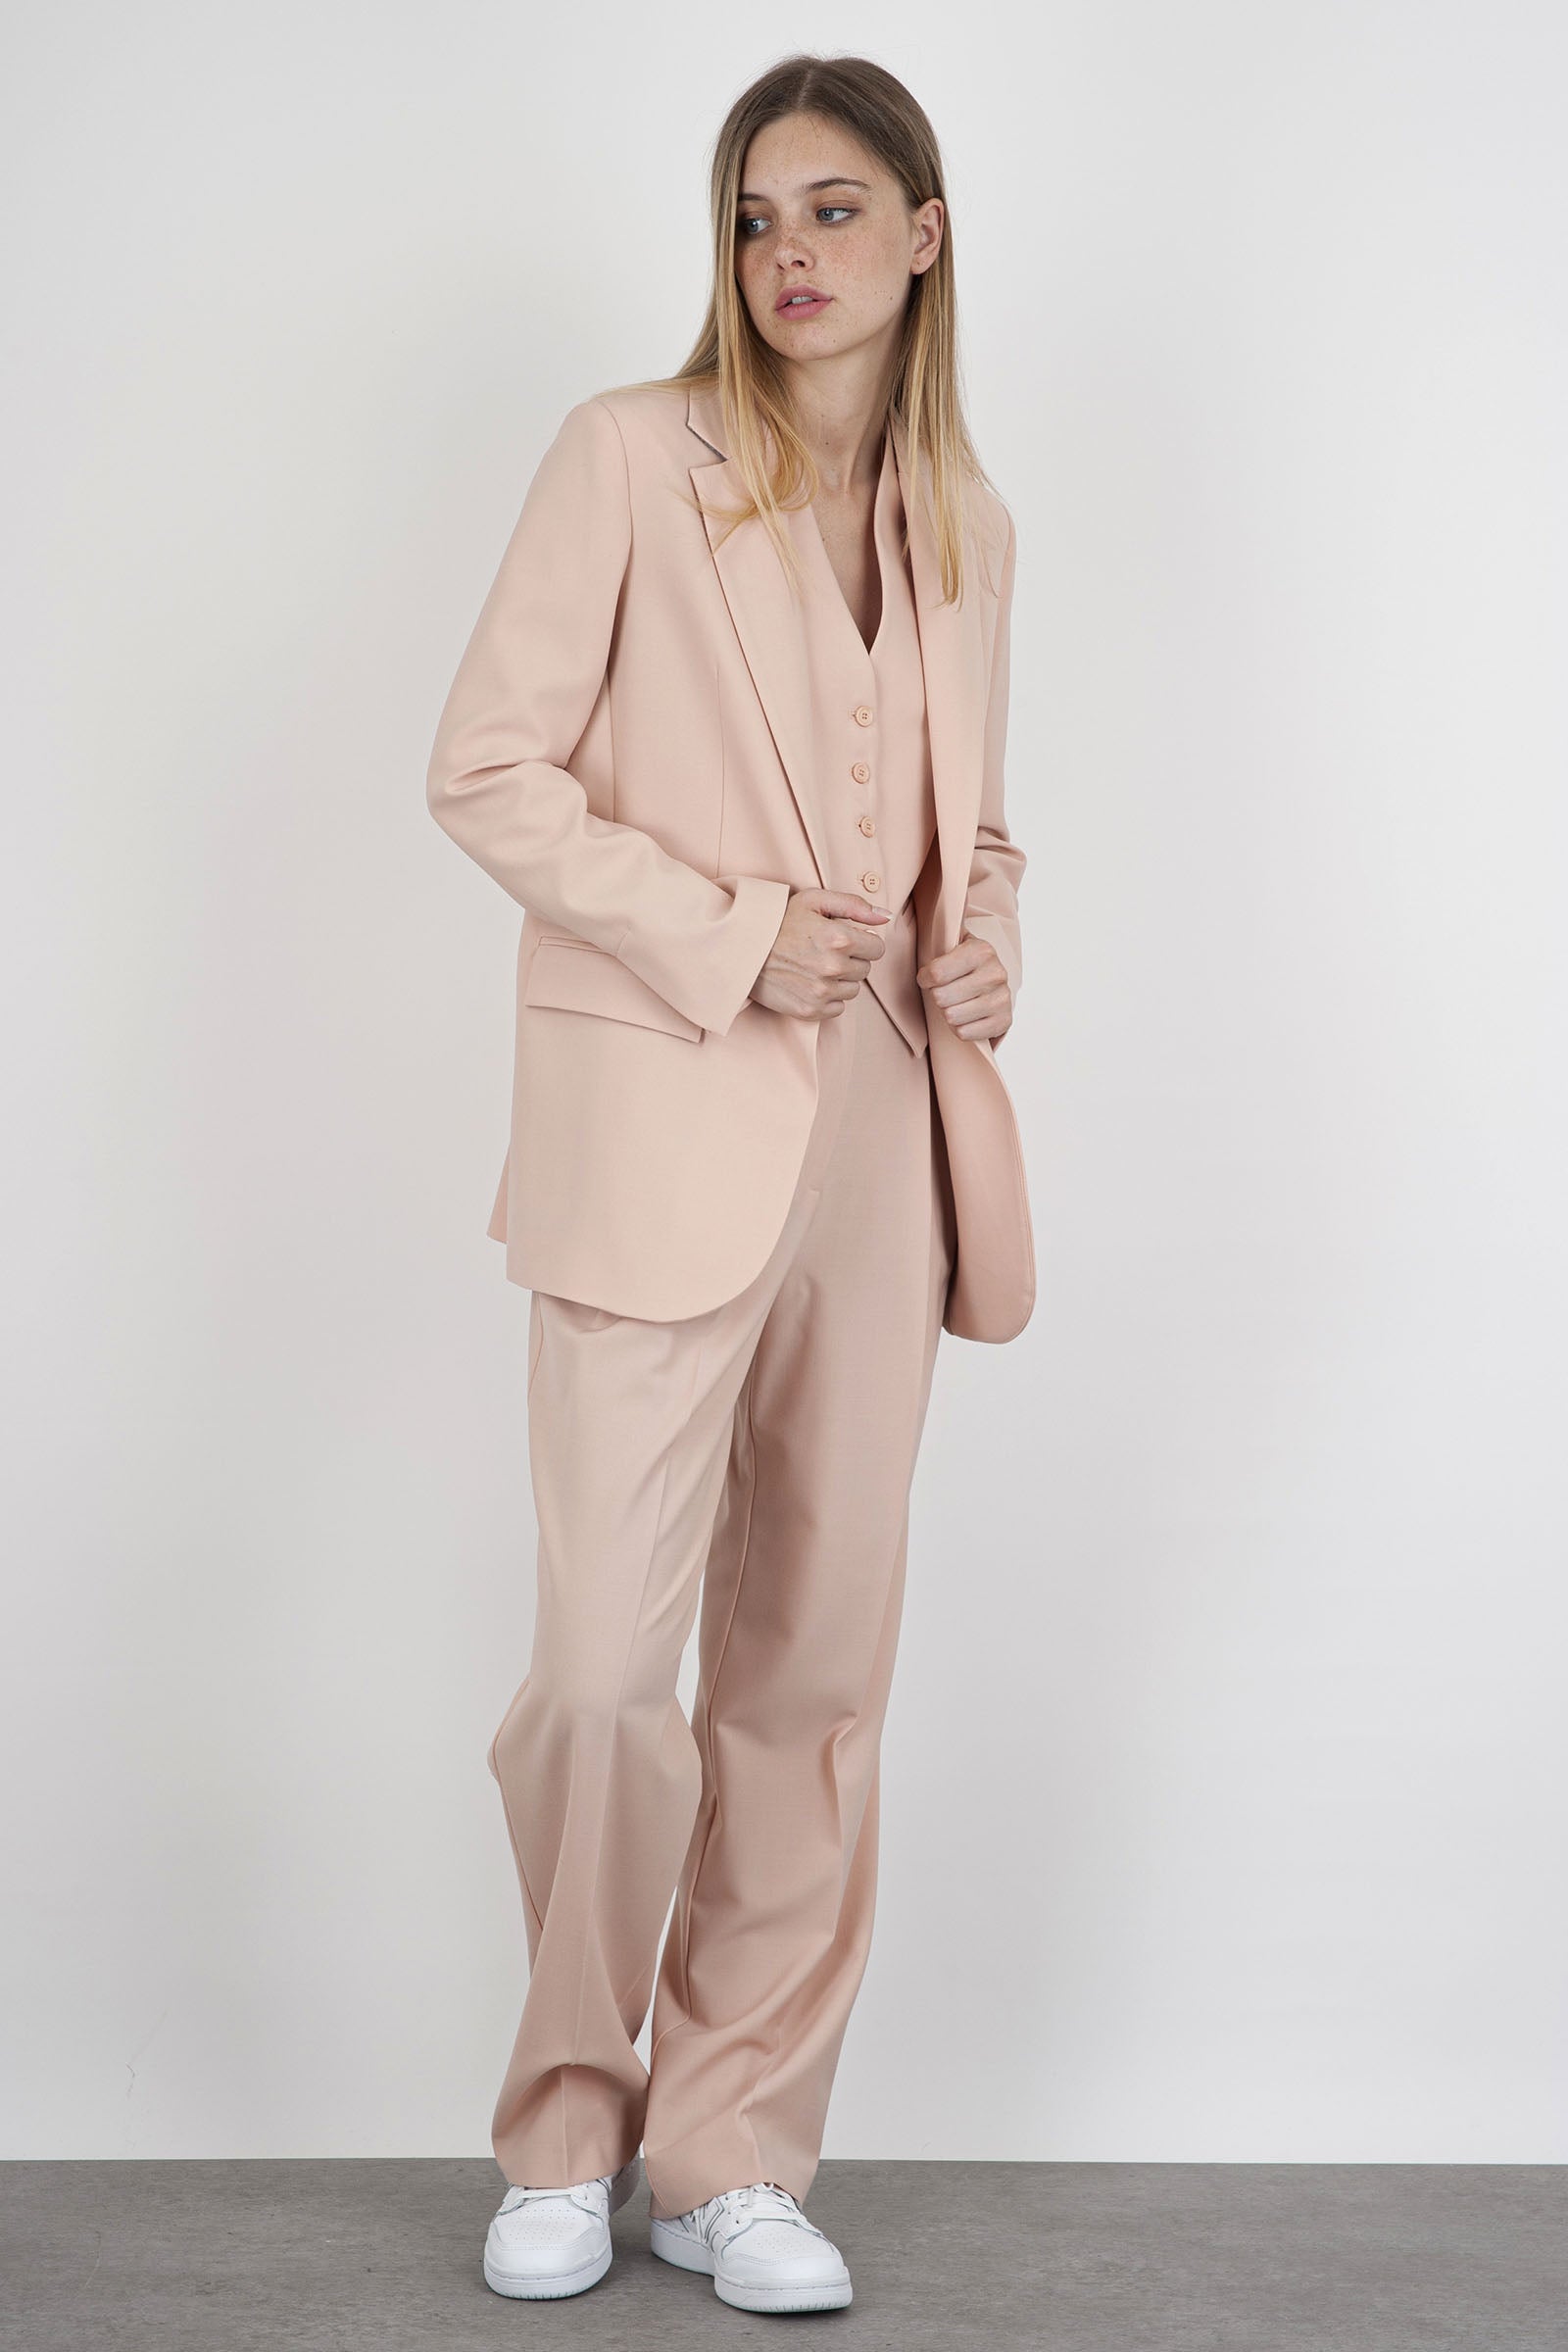 Semicouture Jody Synthetic Powder Pink Trousers - 7